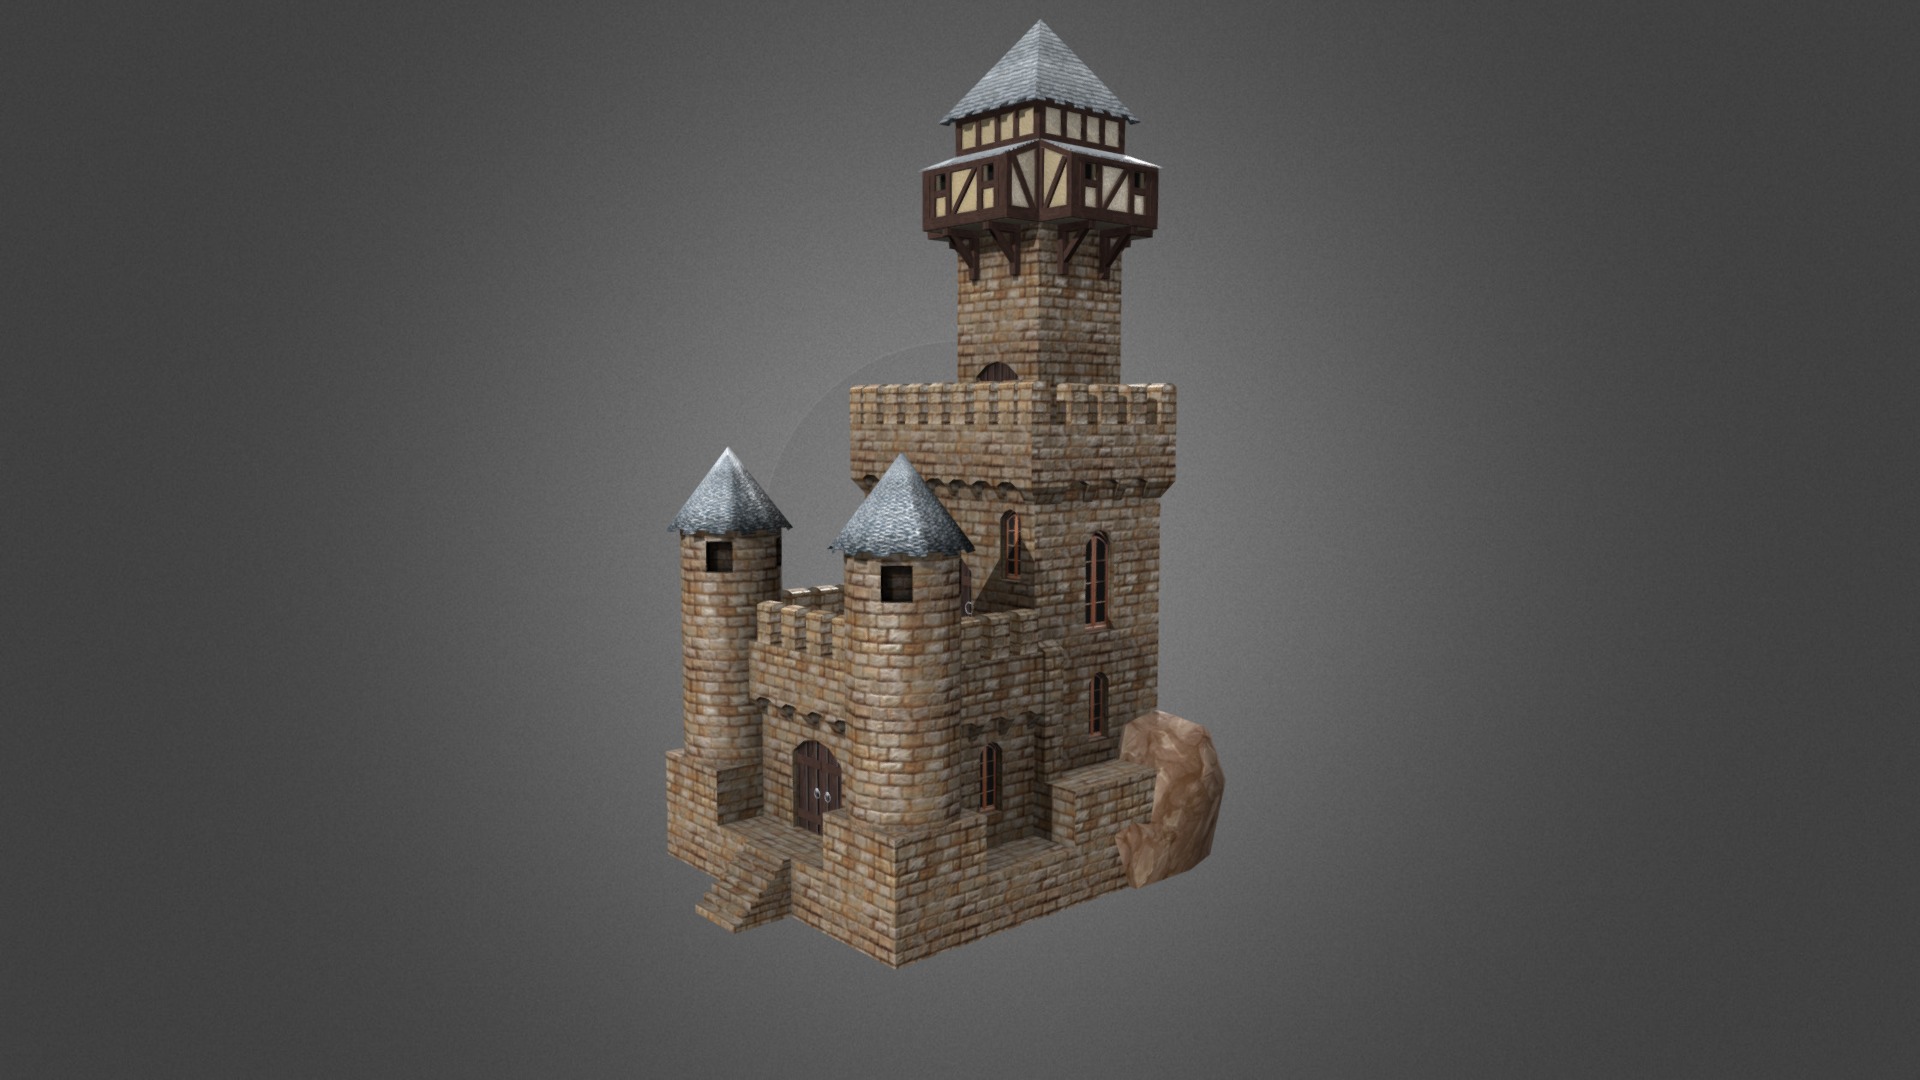 Low poly game-ready 3d model of a Medieval Tower Of Mistral

Download: http://gamedev.cgduck.pro - Medieval Tower Of Mistral - 3D model by CG Duck (@cg_duck) 3d model